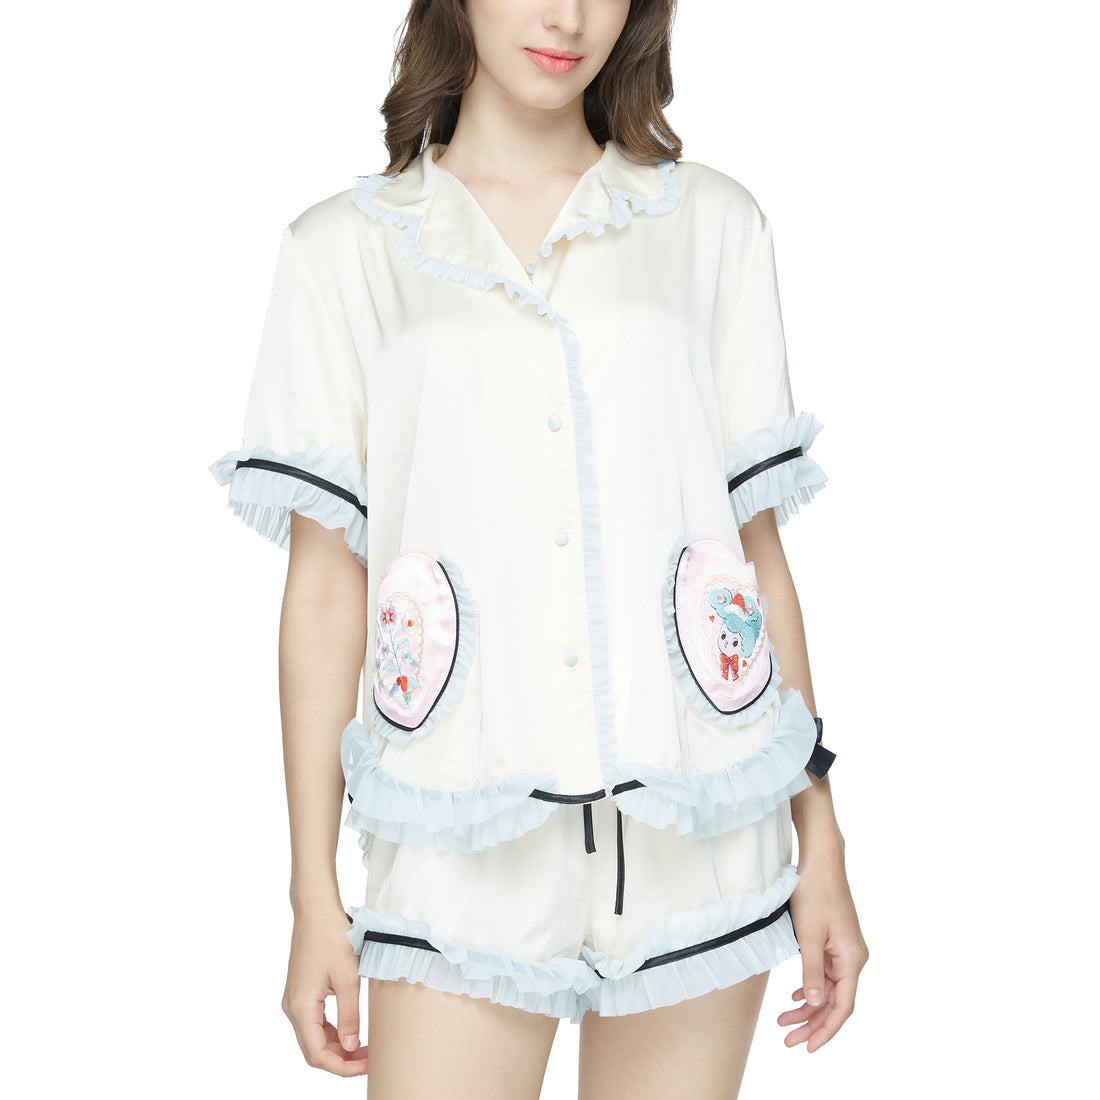 Wacoal x Phannapast: “Candy Wrappers Collection” short-sleeved shirt and shorts pajamas, model WN7D25, cream color (CR)